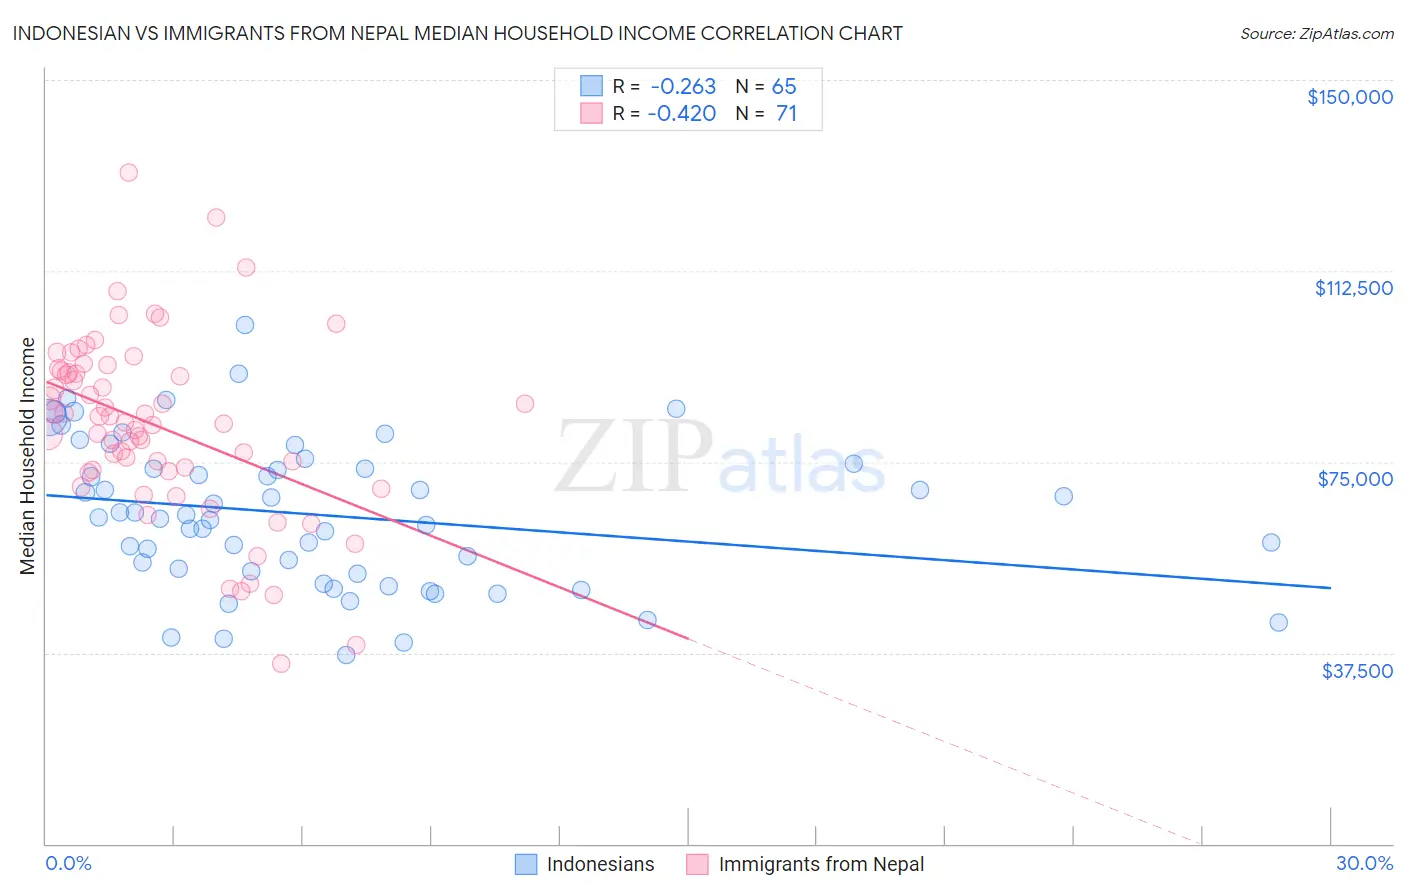 Indonesian vs Immigrants from Nepal Median Household Income